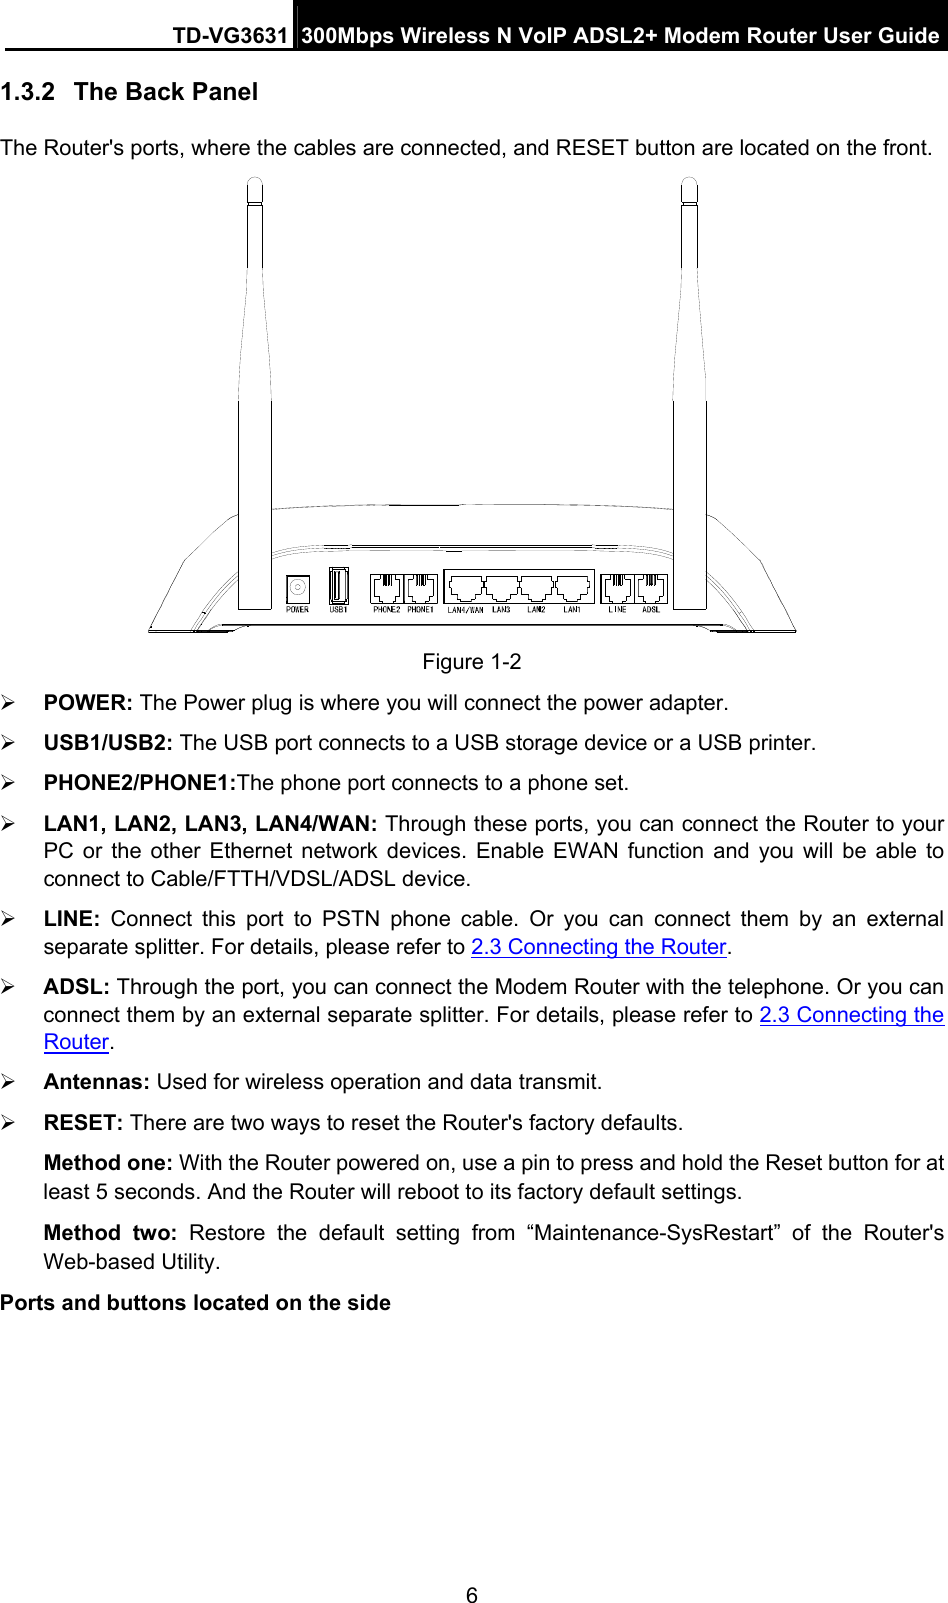 TD-VG3631 300Mbps Wireless N VoIP ADSL2+ Modem Router User Guide 6 1.3.2  The Back Panel The Router&apos;s ports, where the cables are connected, and RESET button are located on the front.    Figure 1-2  POWER: The Power plug is where you will connect the power adapter.  USB1/USB2: The USB port connects to a USB storage device or a USB printer.  PHONE2/PHONE1:The phone port connects to a phone set.  LAN1, LAN2, LAN3, LAN4/WAN: Through these ports, you can connect the Router to your PC or the other Ethernet network devices. Enable EWAN function and you will be able to connect to Cable/FTTH/VDSL/ADSL device.  LINE:  Connect this port to PSTN phone cable. Or you can connect them by an external separate splitter. For details, please refer to 2.3 Connecting the Router.  ADSL: Through the port, you can connect the Modem Router with the telephone. Or you can connect them by an external separate splitter. For details, please refer to 2.3 Connecting the Router.   Antennas: Used for wireless operation and data transmit.  RESET: There are two ways to reset the Router&apos;s factory defaults.   Method one: With the Router powered on, use a pin to press and hold the Reset button for at least 5 seconds. And the Router will reboot to its factory default settings. Method two: Restore the default setting from “Maintenance-SysRestart”  of the Router&apos;s Web-based Utility. Ports and buttons located on the side  